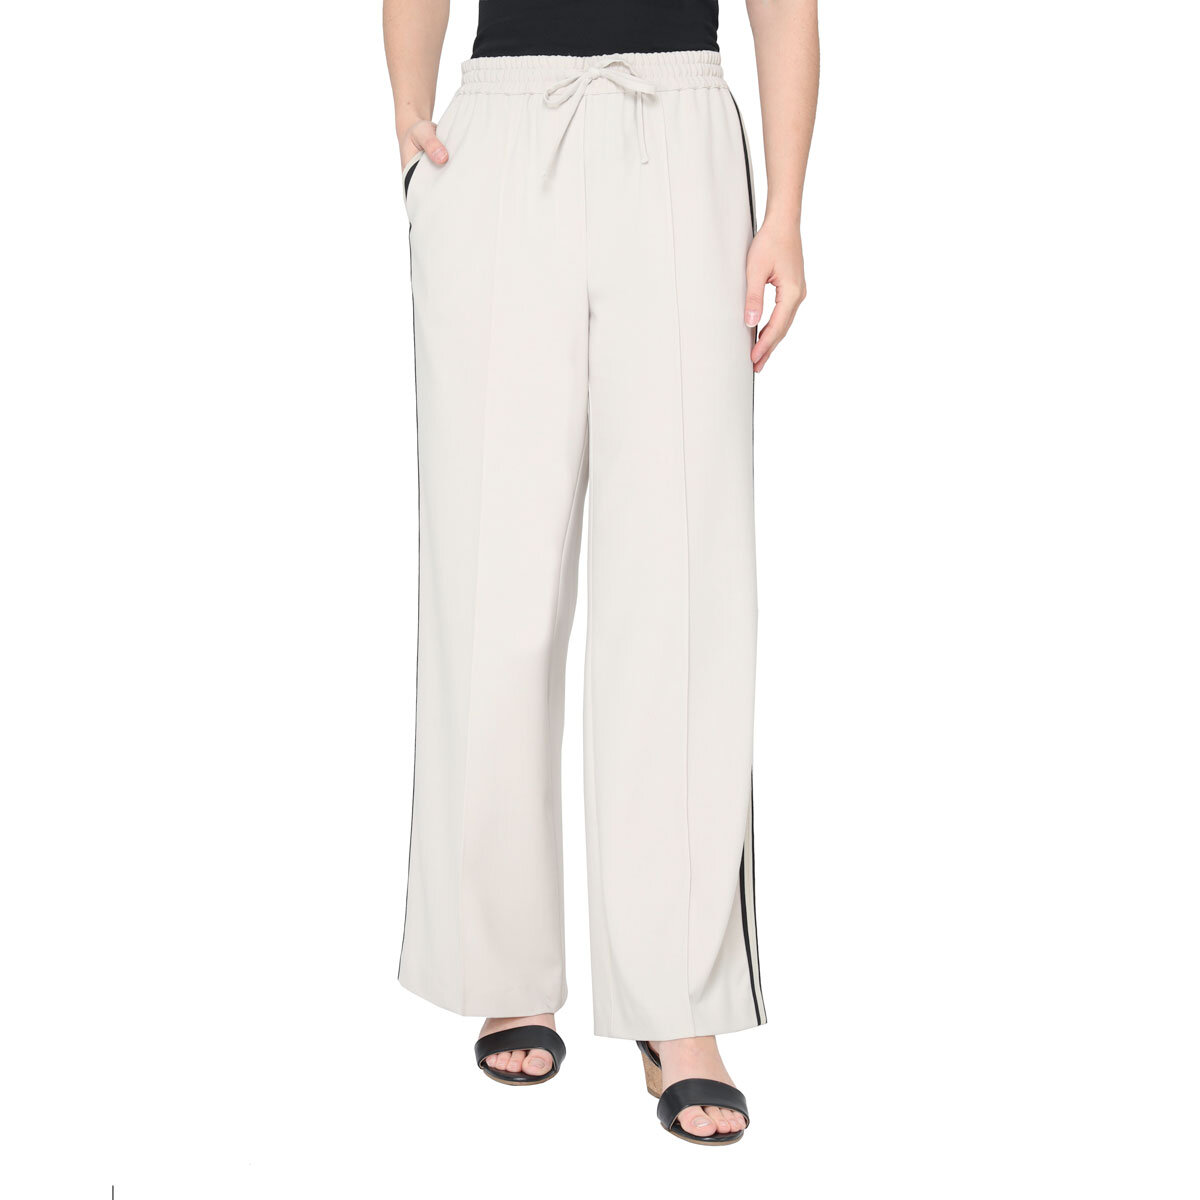 B.C. Clothing Co. Ladies pull-on trouser with contrast side stripe in Sand